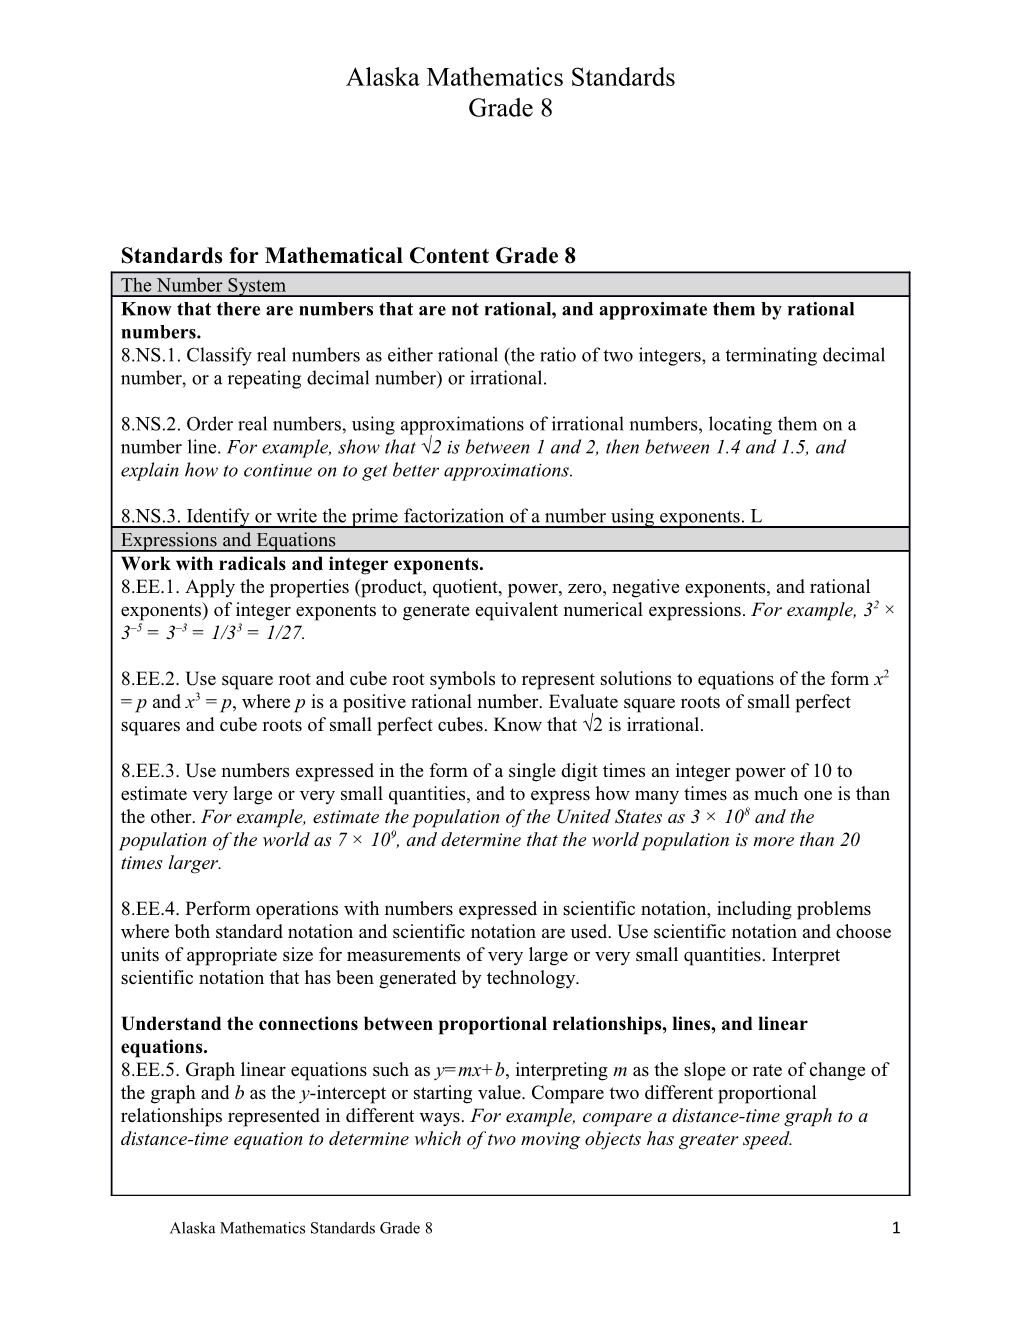 Standards for Mathematical Content Grade 8